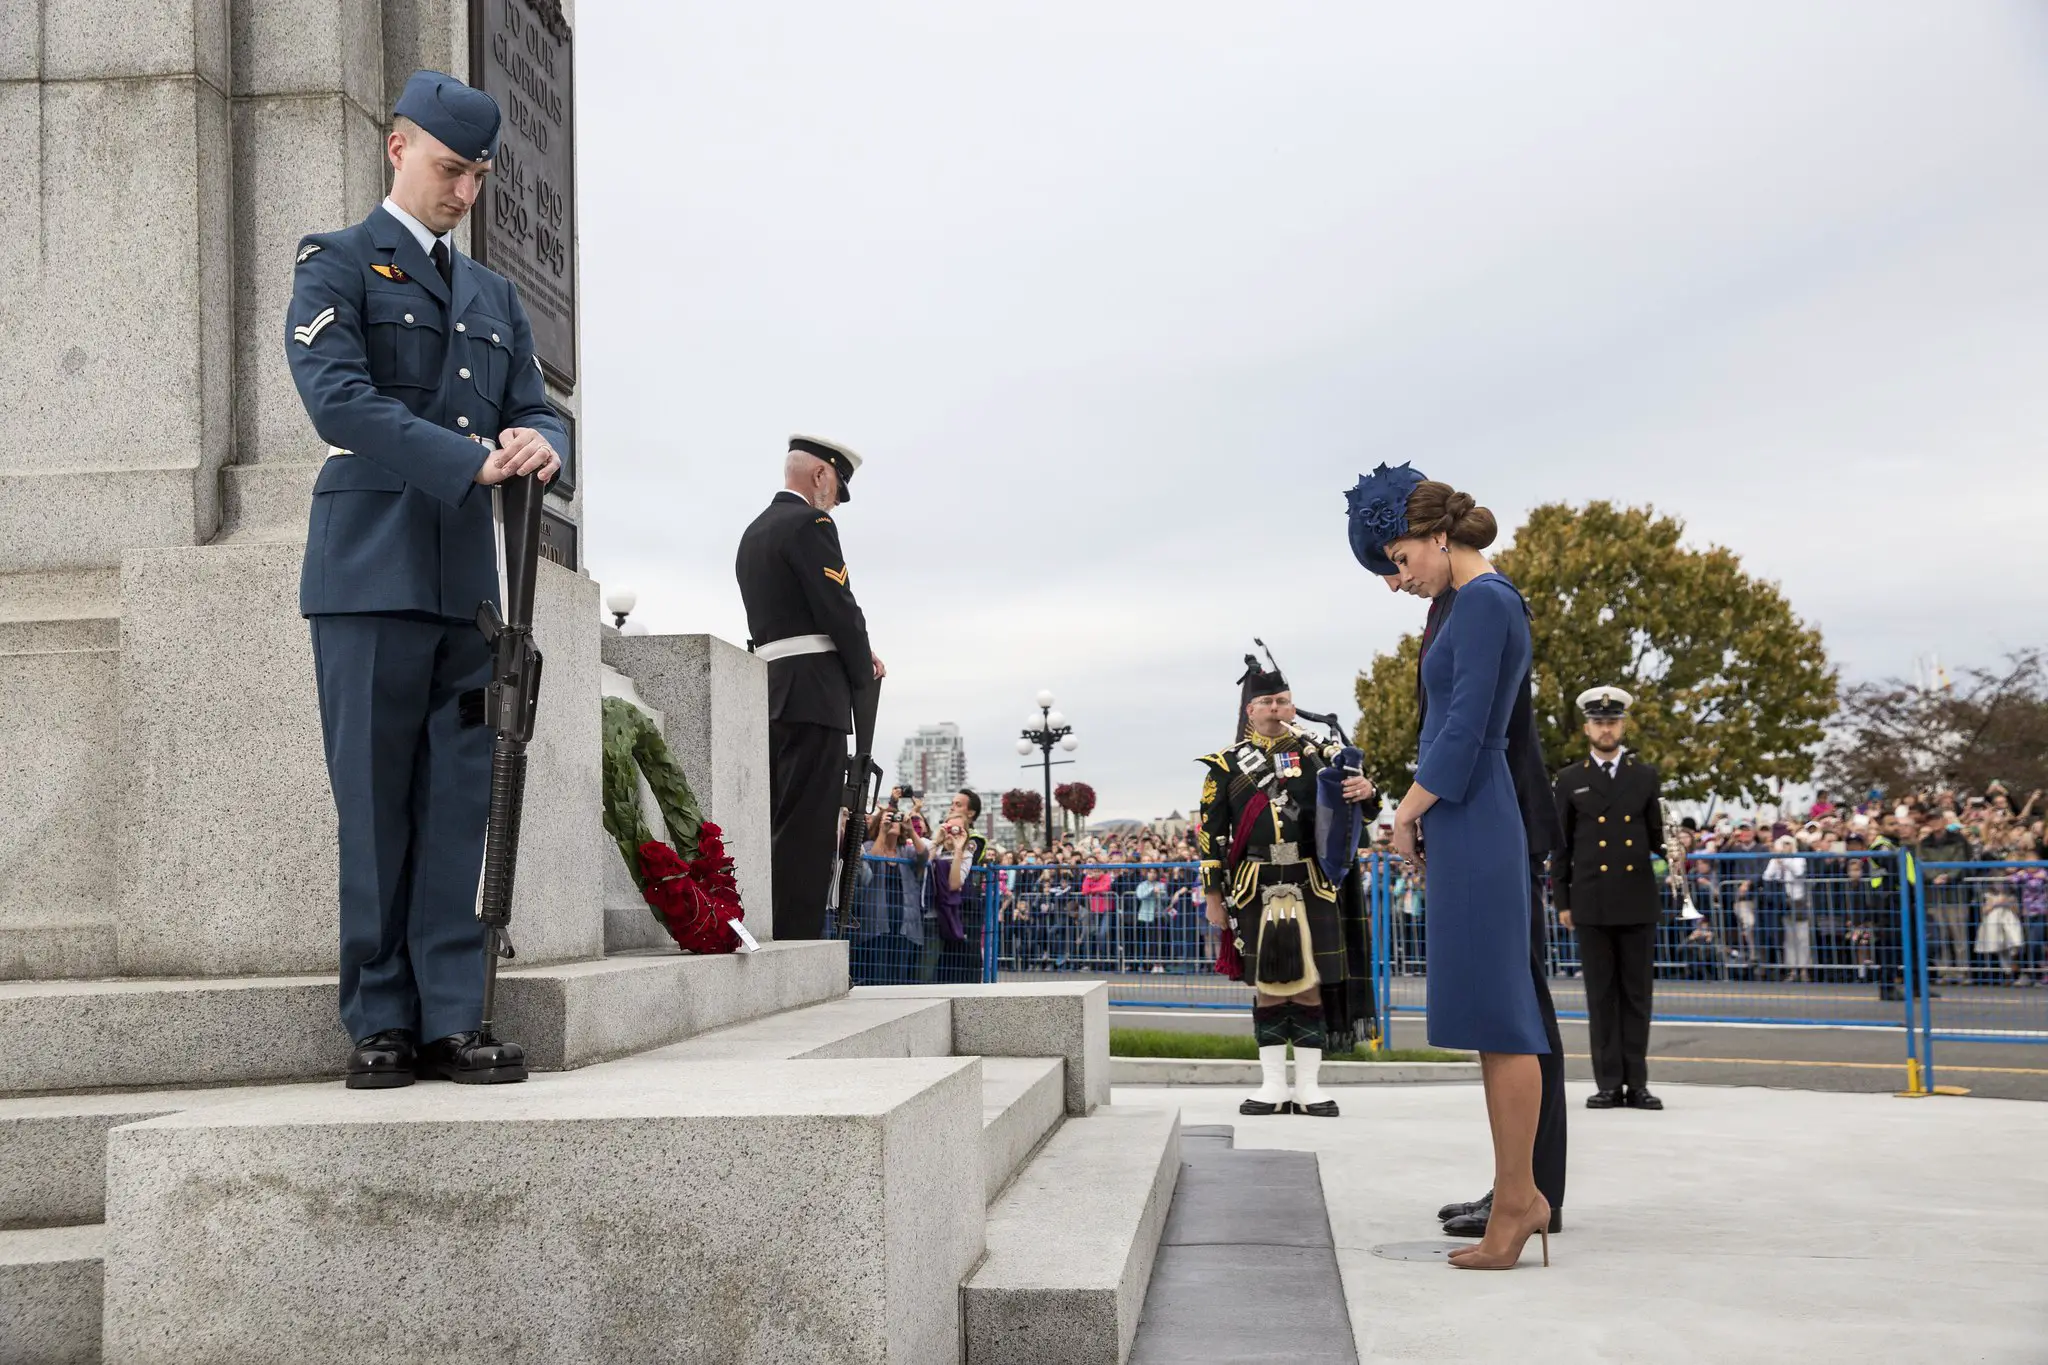 The Duke and Duchess of Cambridge paid respect to the soldiers in Victoria during welcome ceremony